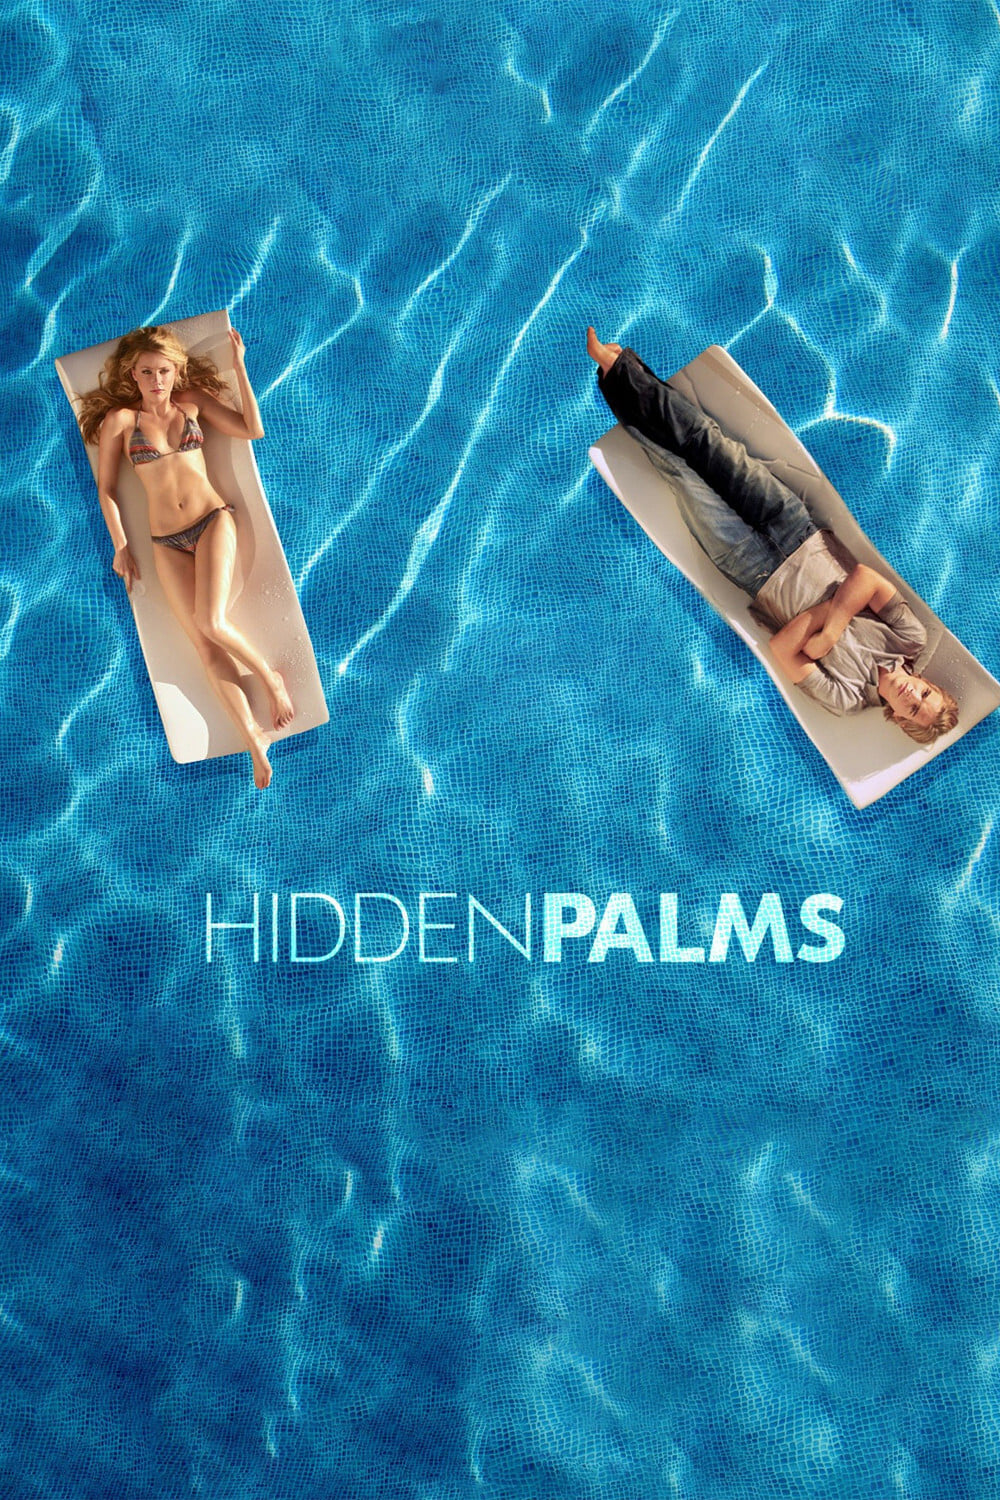 Hidden Palms TV Shows About Mysterious